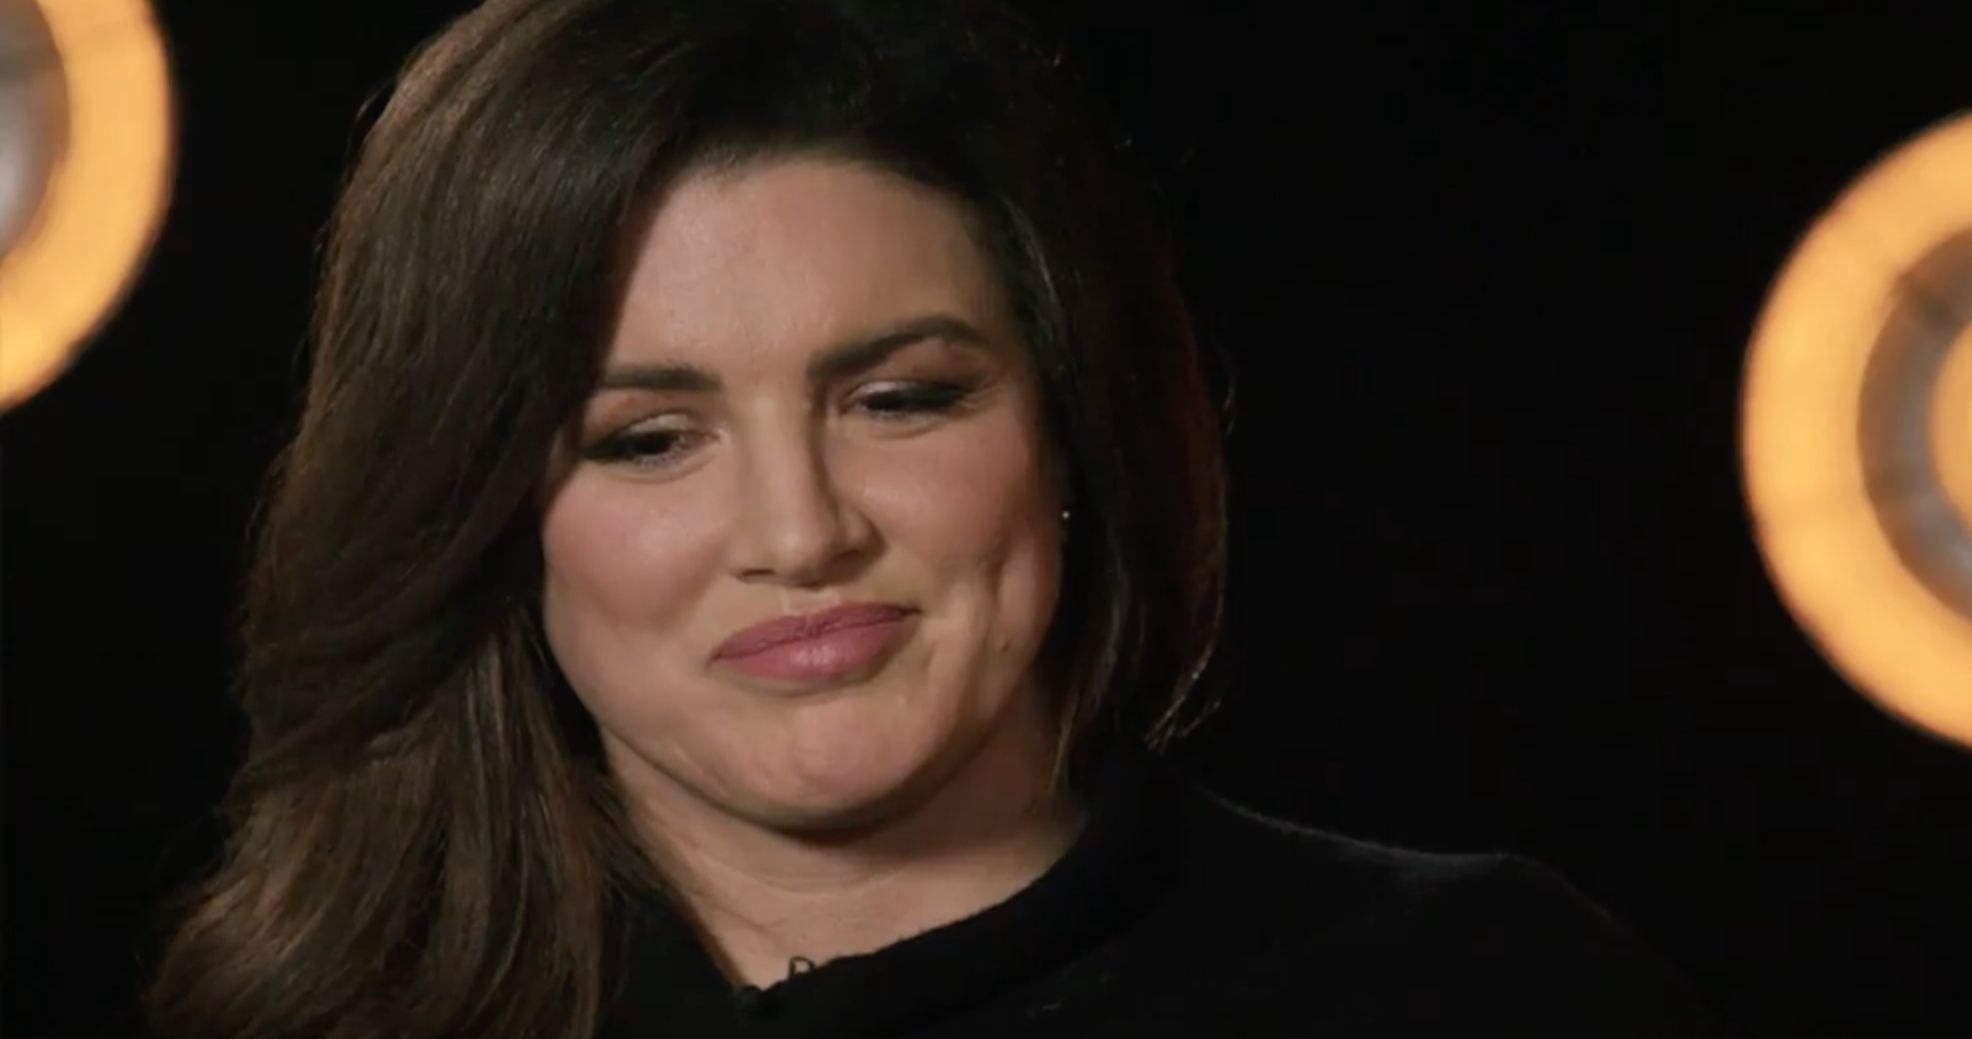 Gina Carano Gives First Sit-Down Interview About The Mandalorian Firing This Sunday on Ben Shapiro